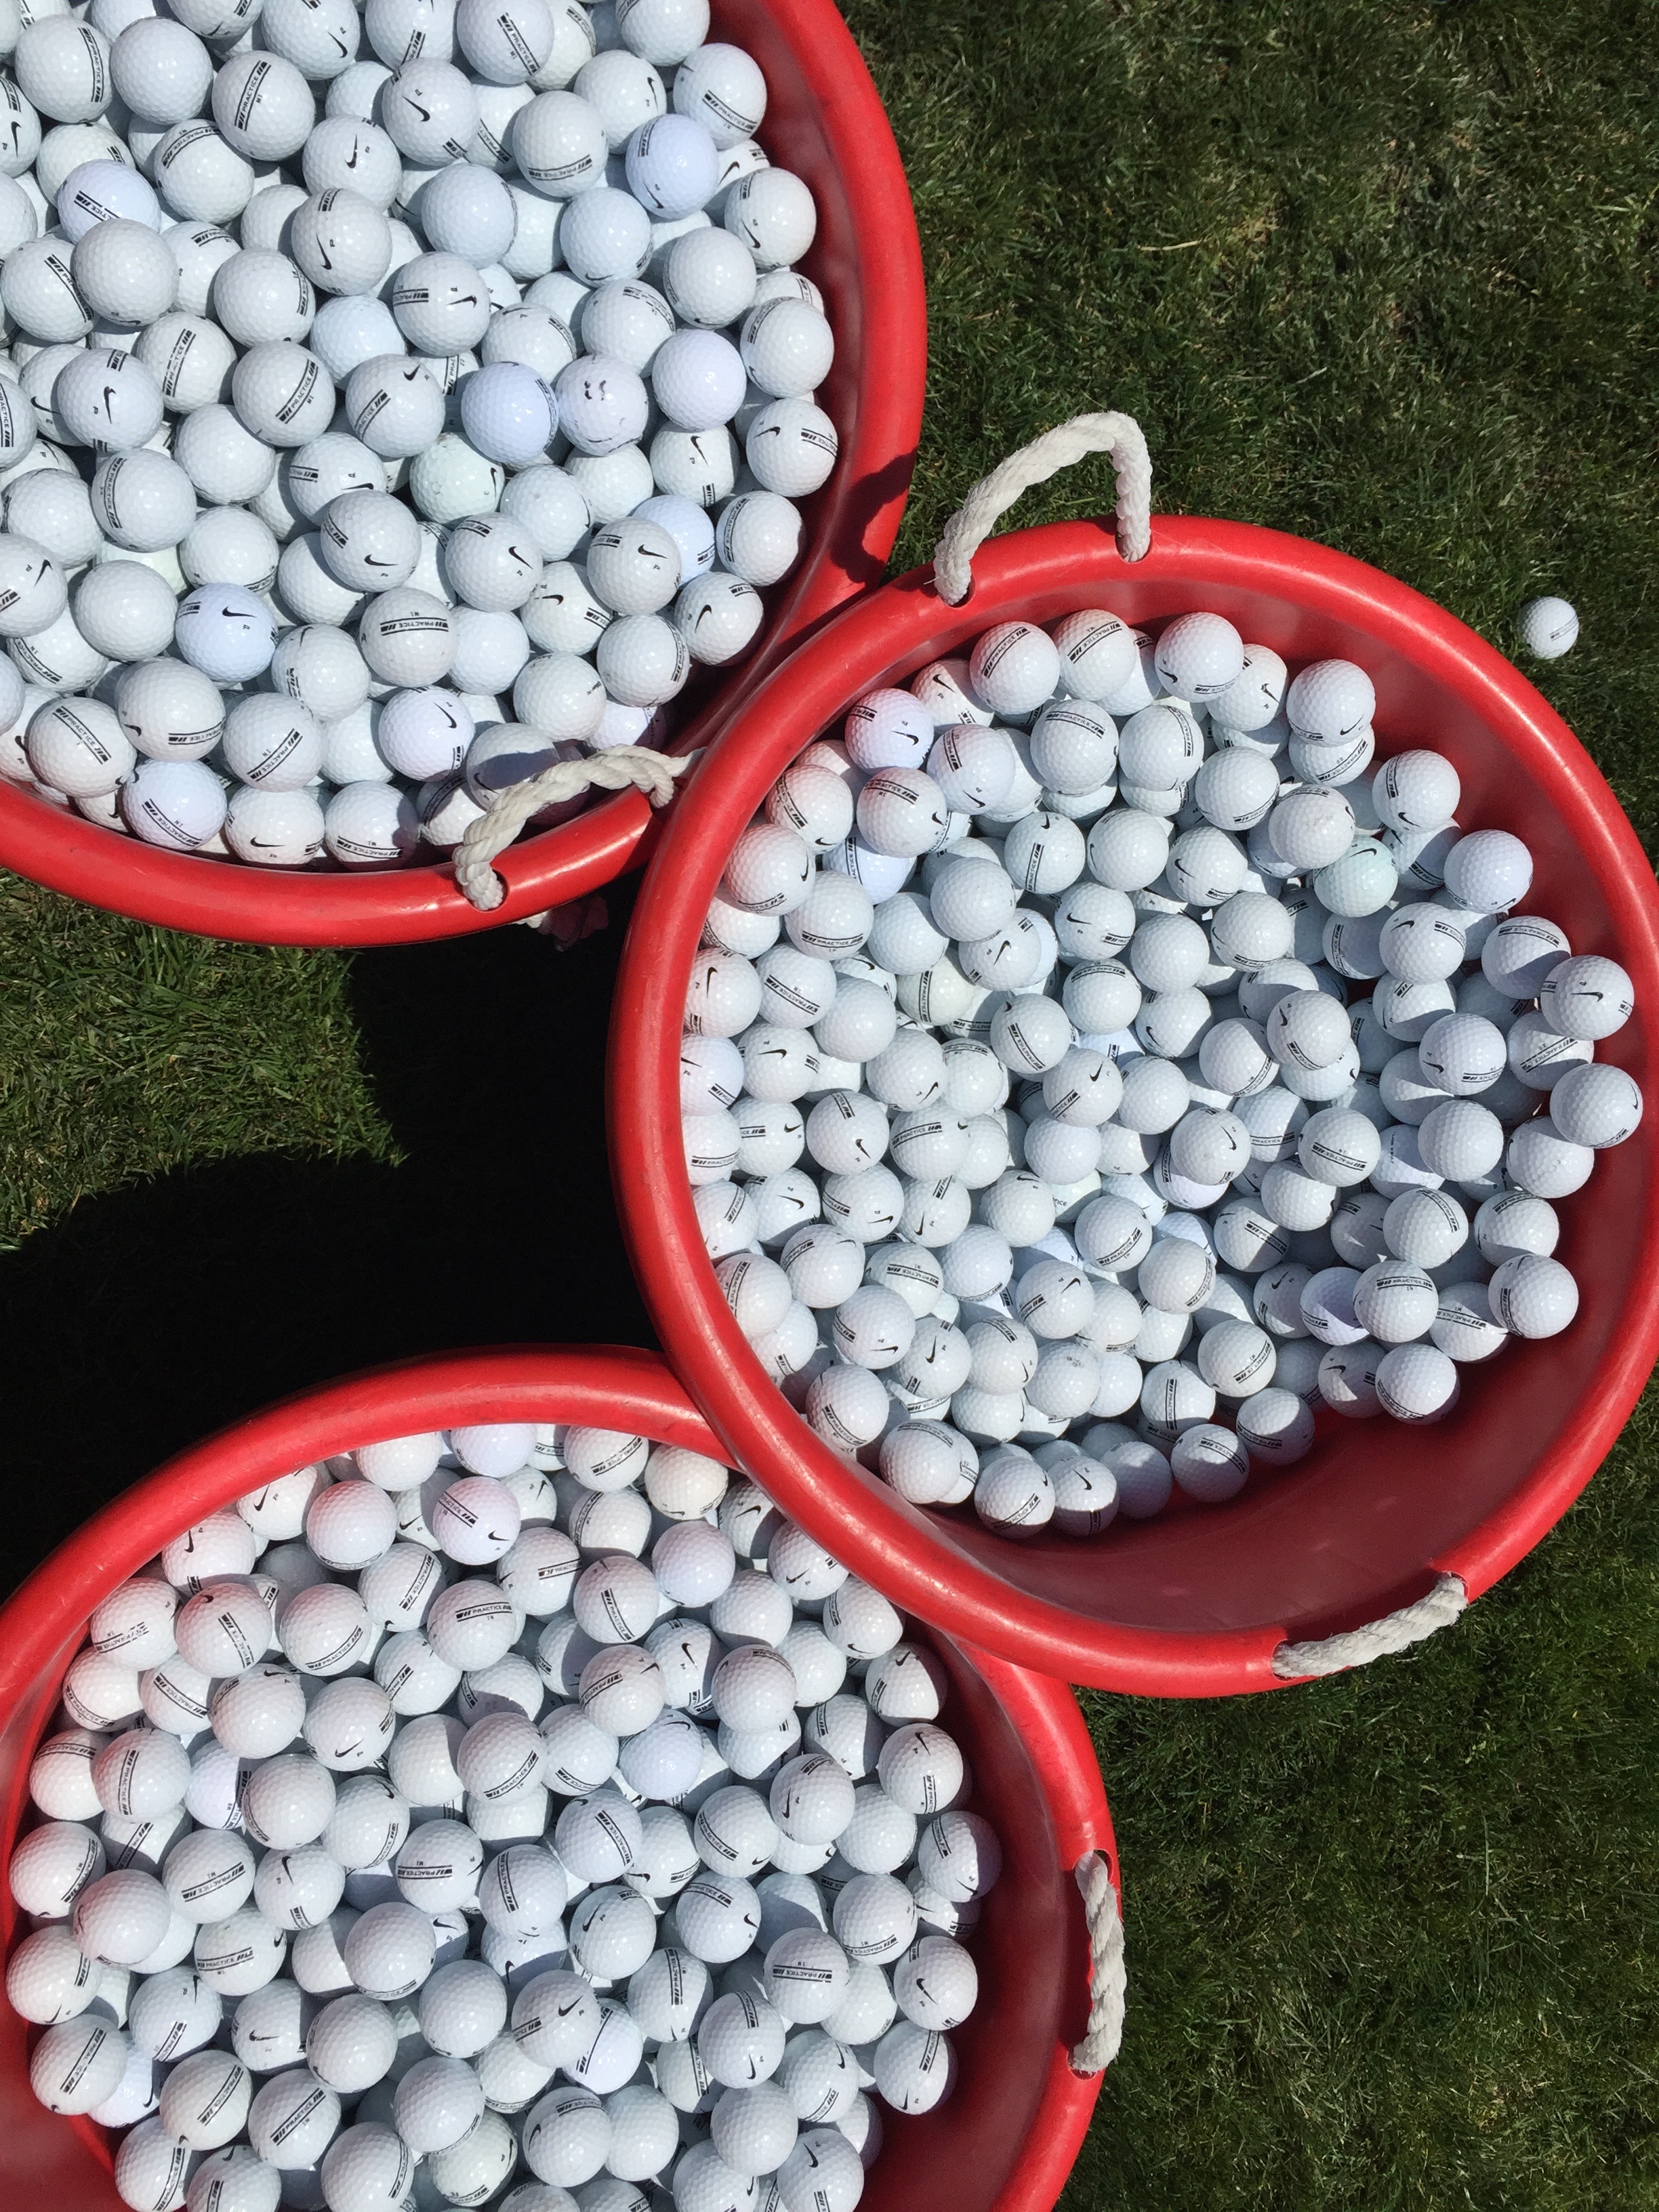 Golf balls at the TGR Learning Lab 